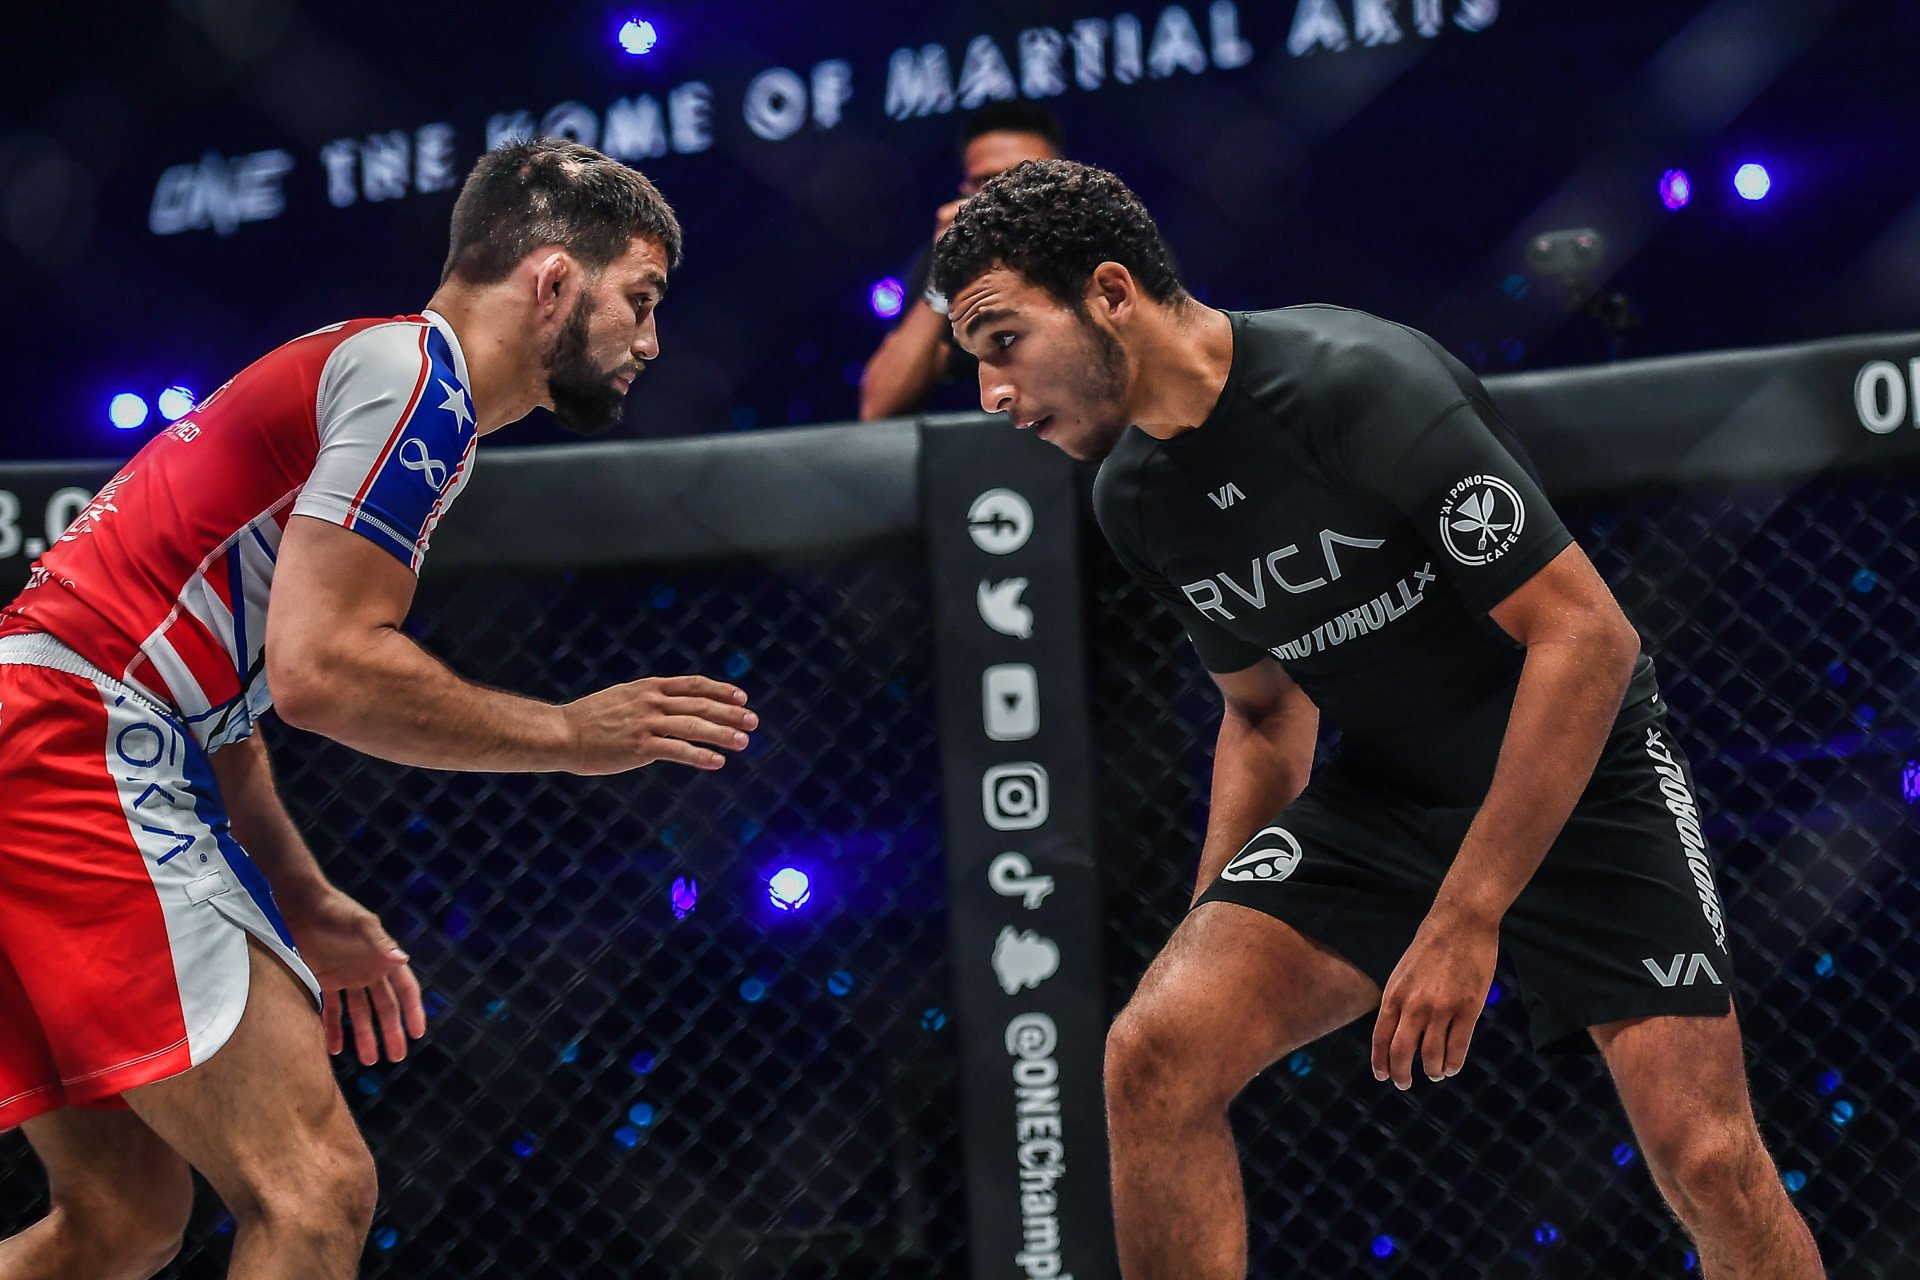 Tye Ruotolo and Garry Tonon square up in their submission grappling match at ONE 157. Photos: ONE Championship